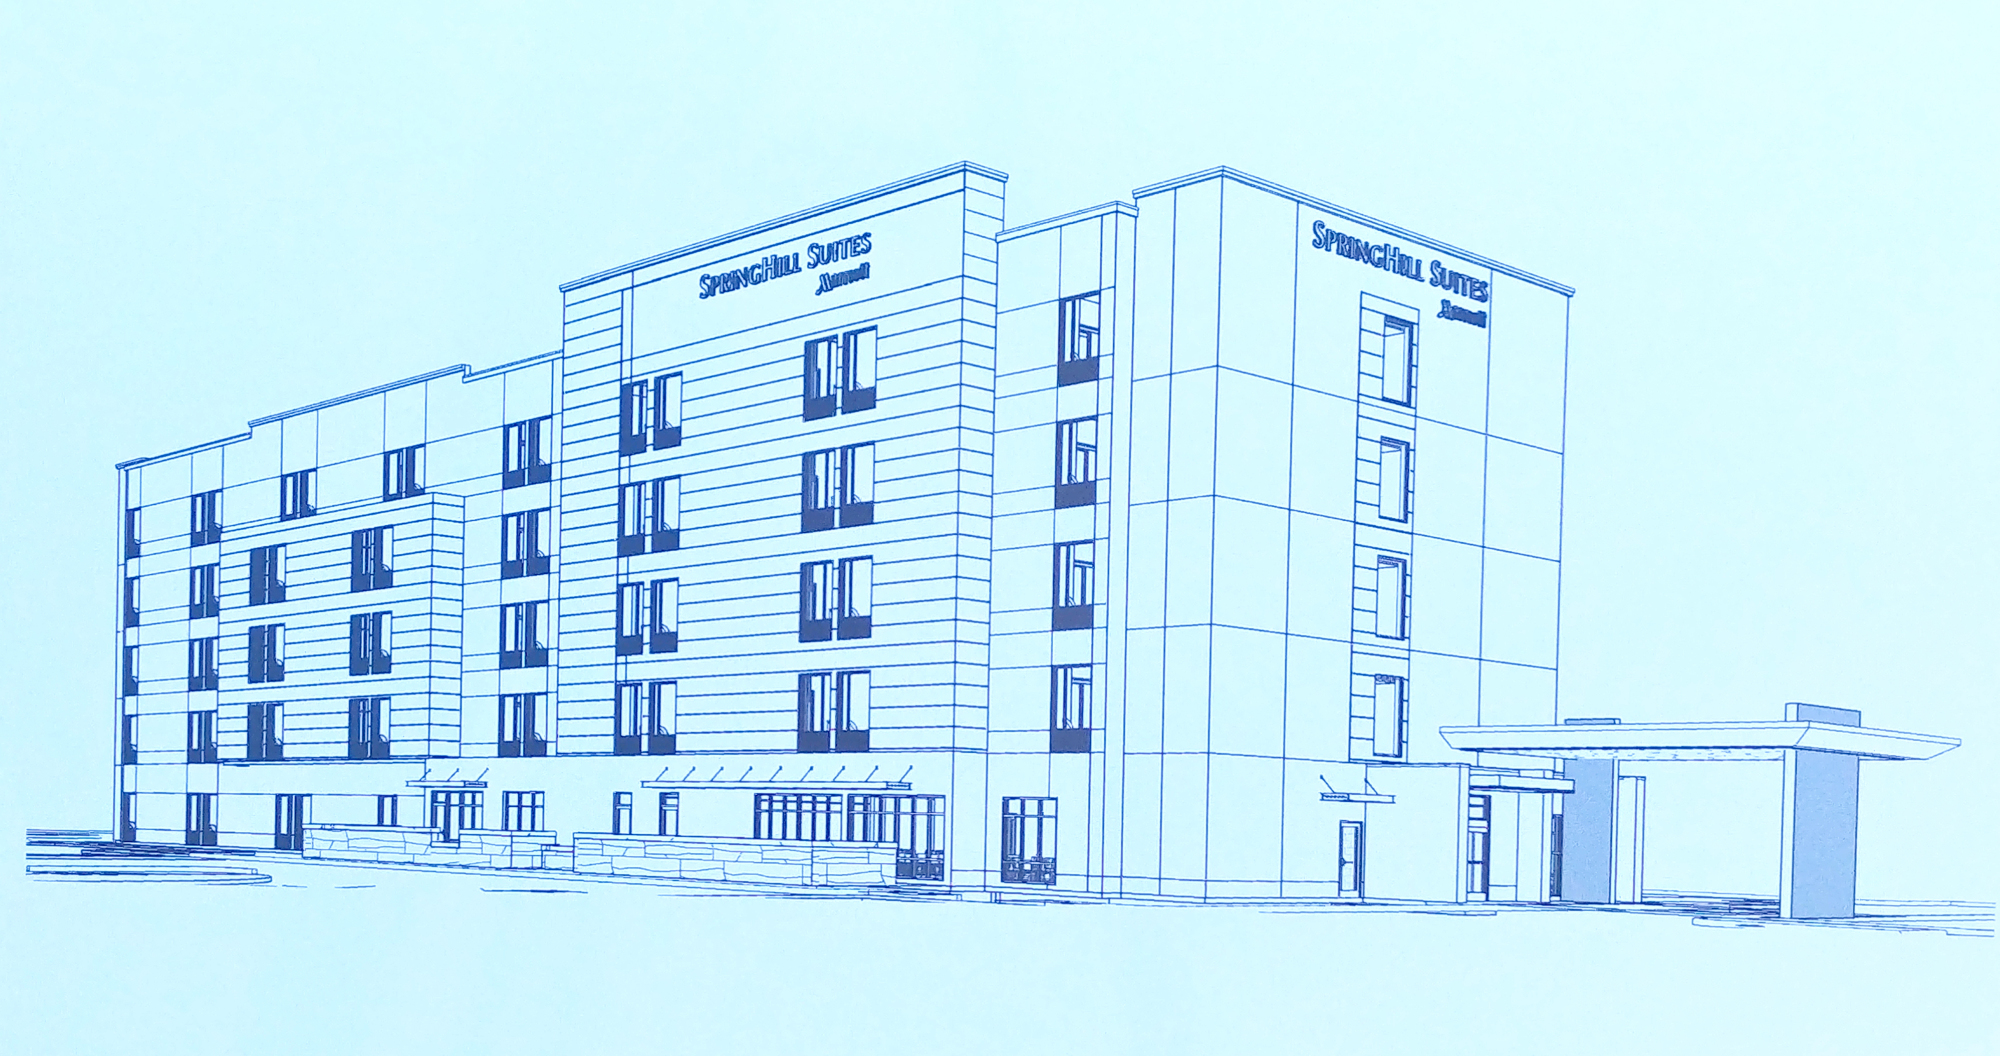 SpringHill Suites by Marriott is planned for the development.